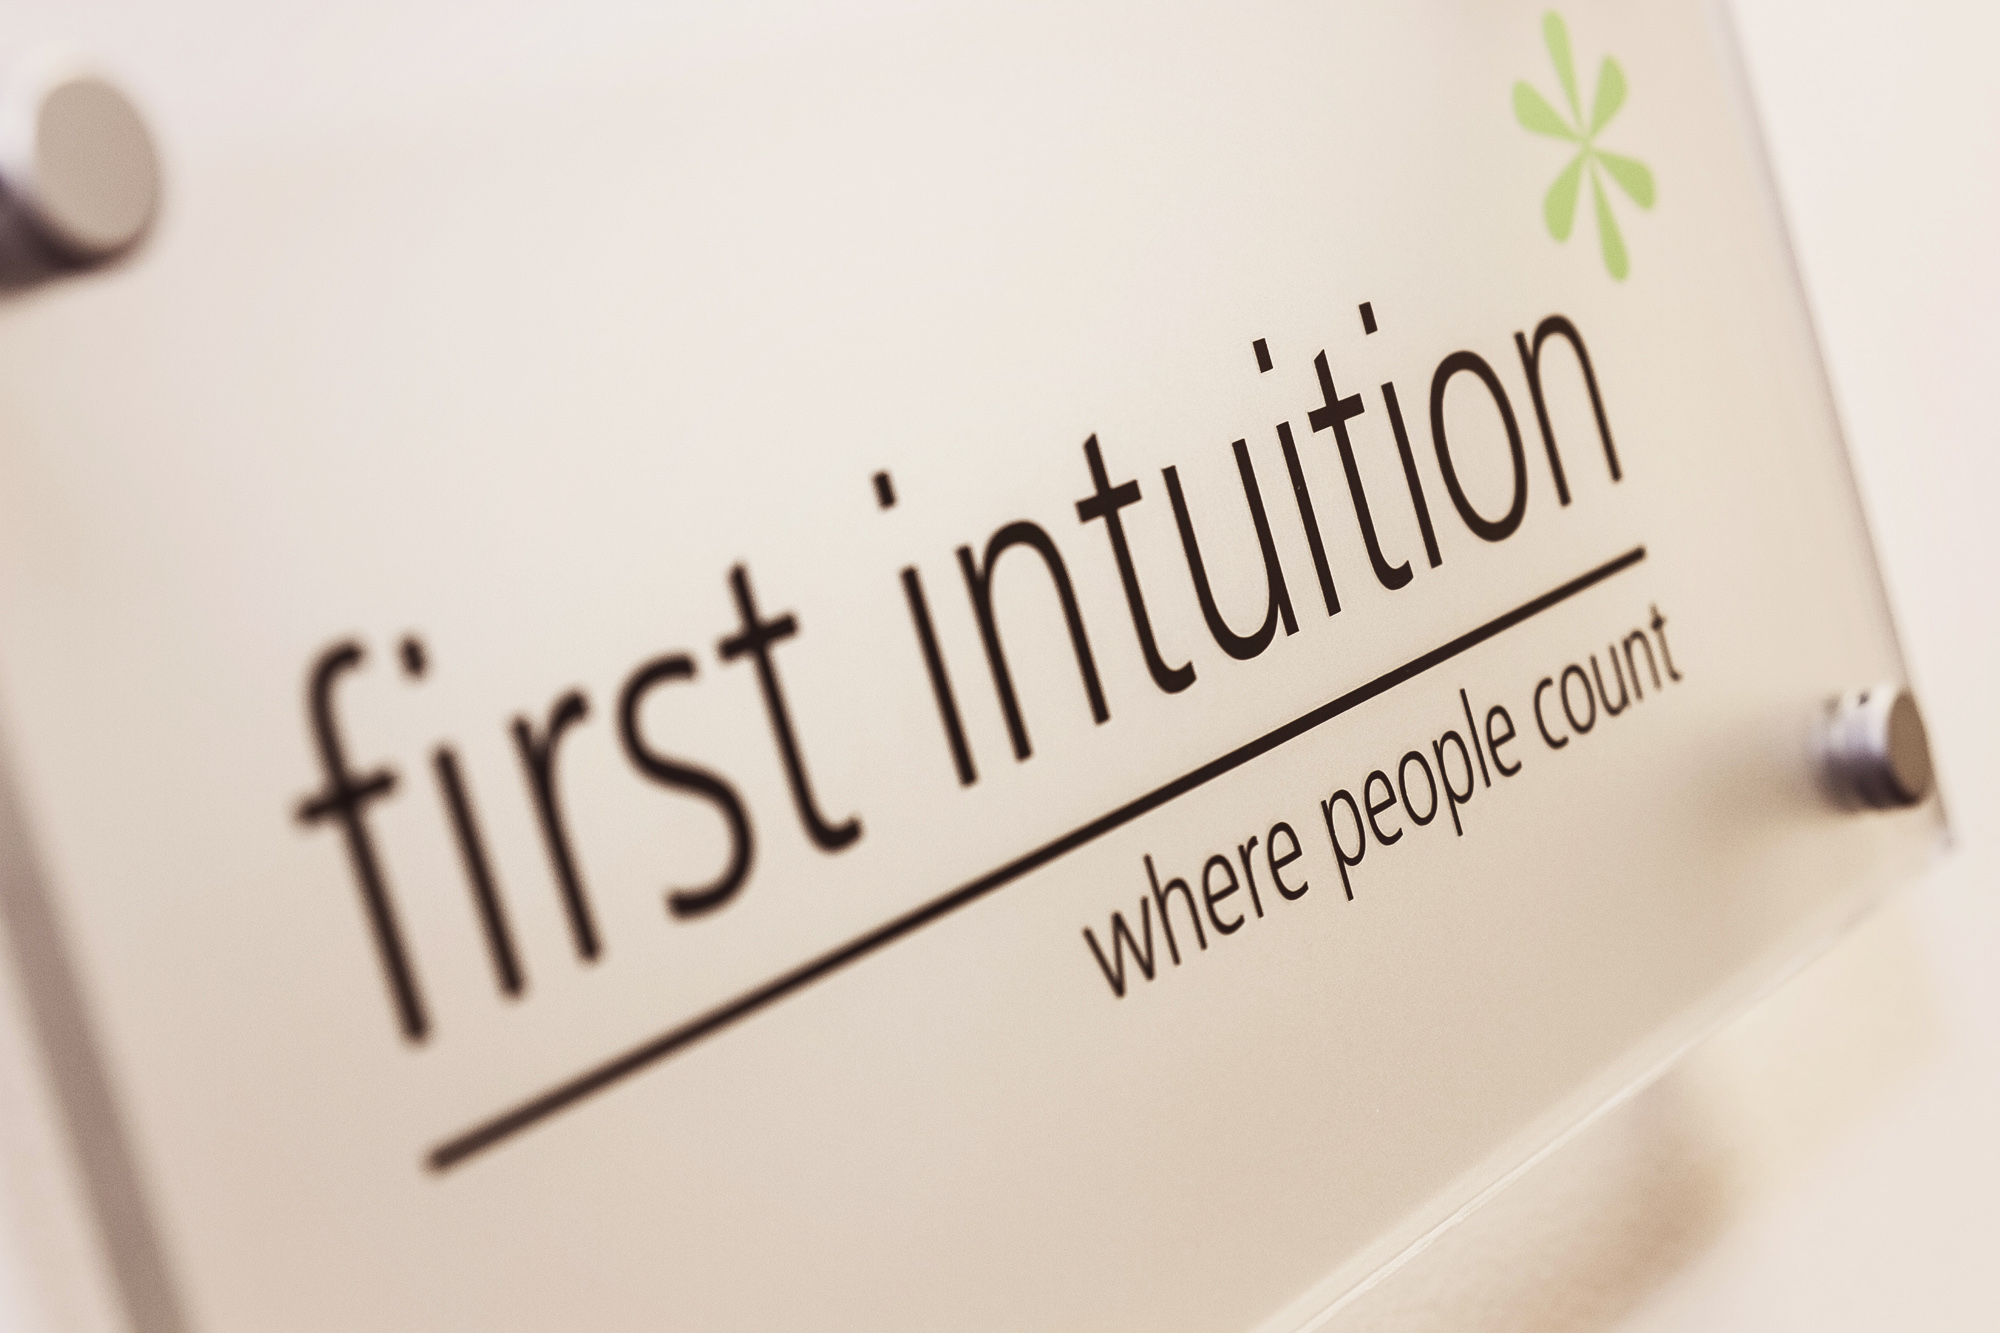 First Intuition logo on sign